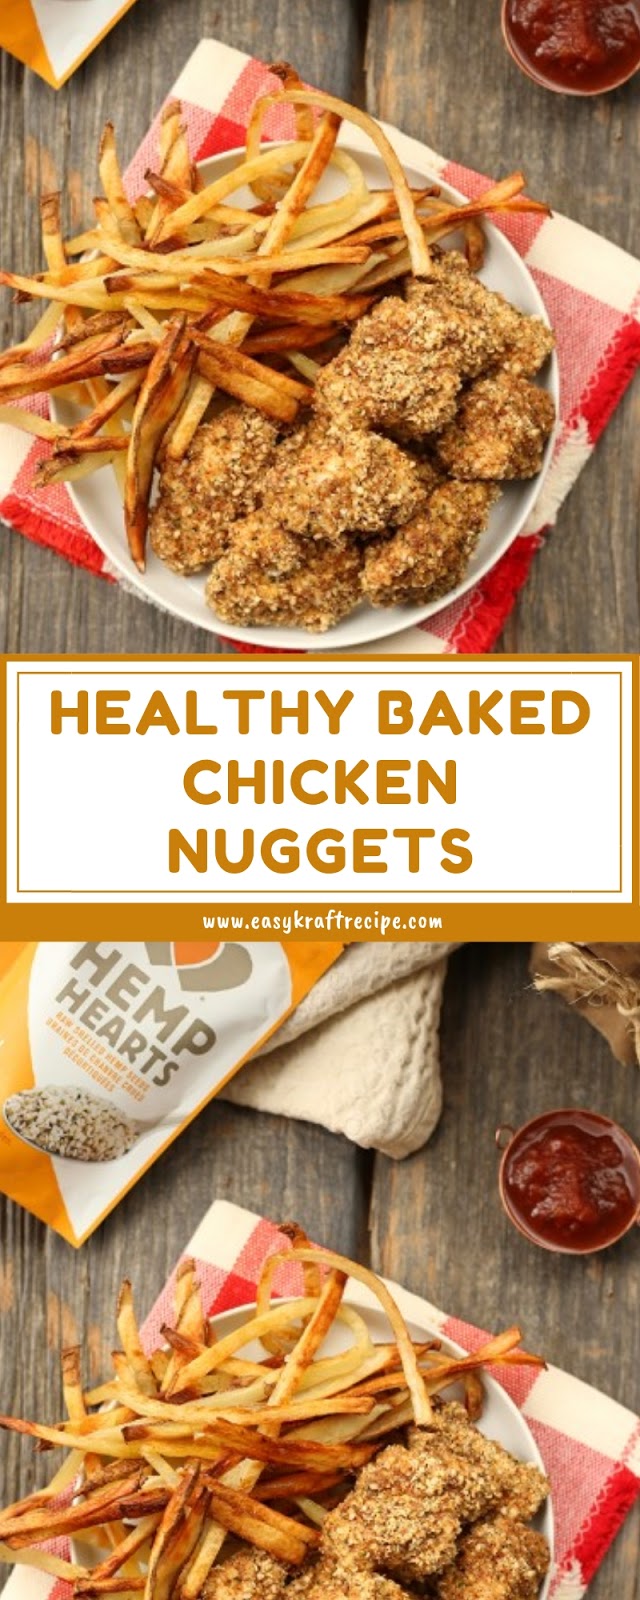 HEALTHY BAKED CHICKEN NUGGETS